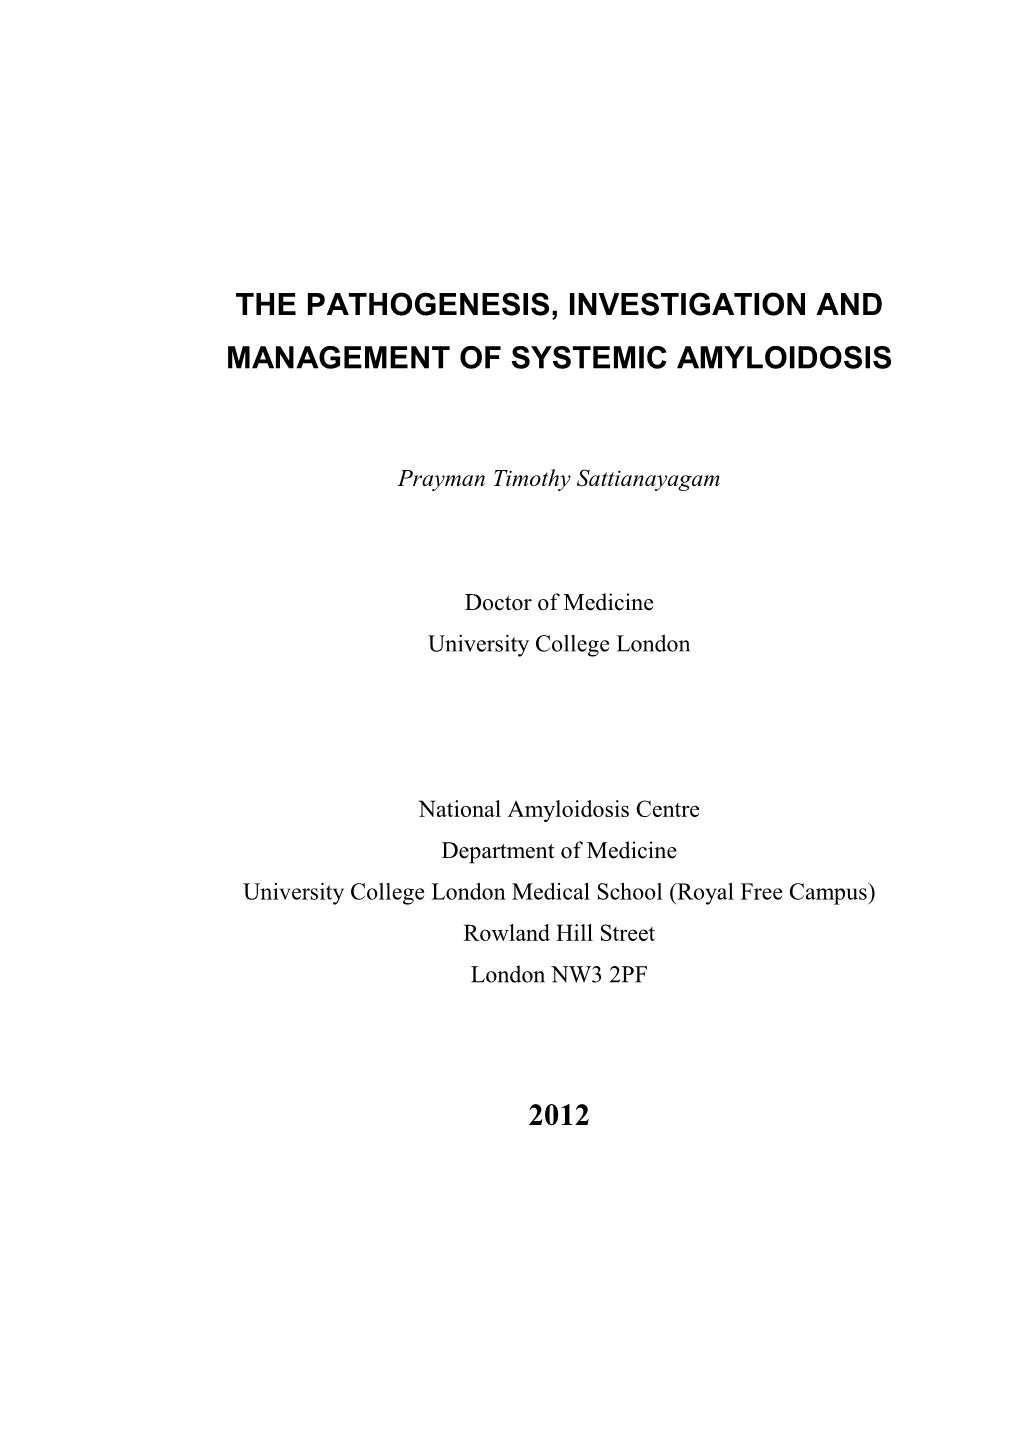 The Pathogenesis, Investigation and Management of Systemic Amyloidosis